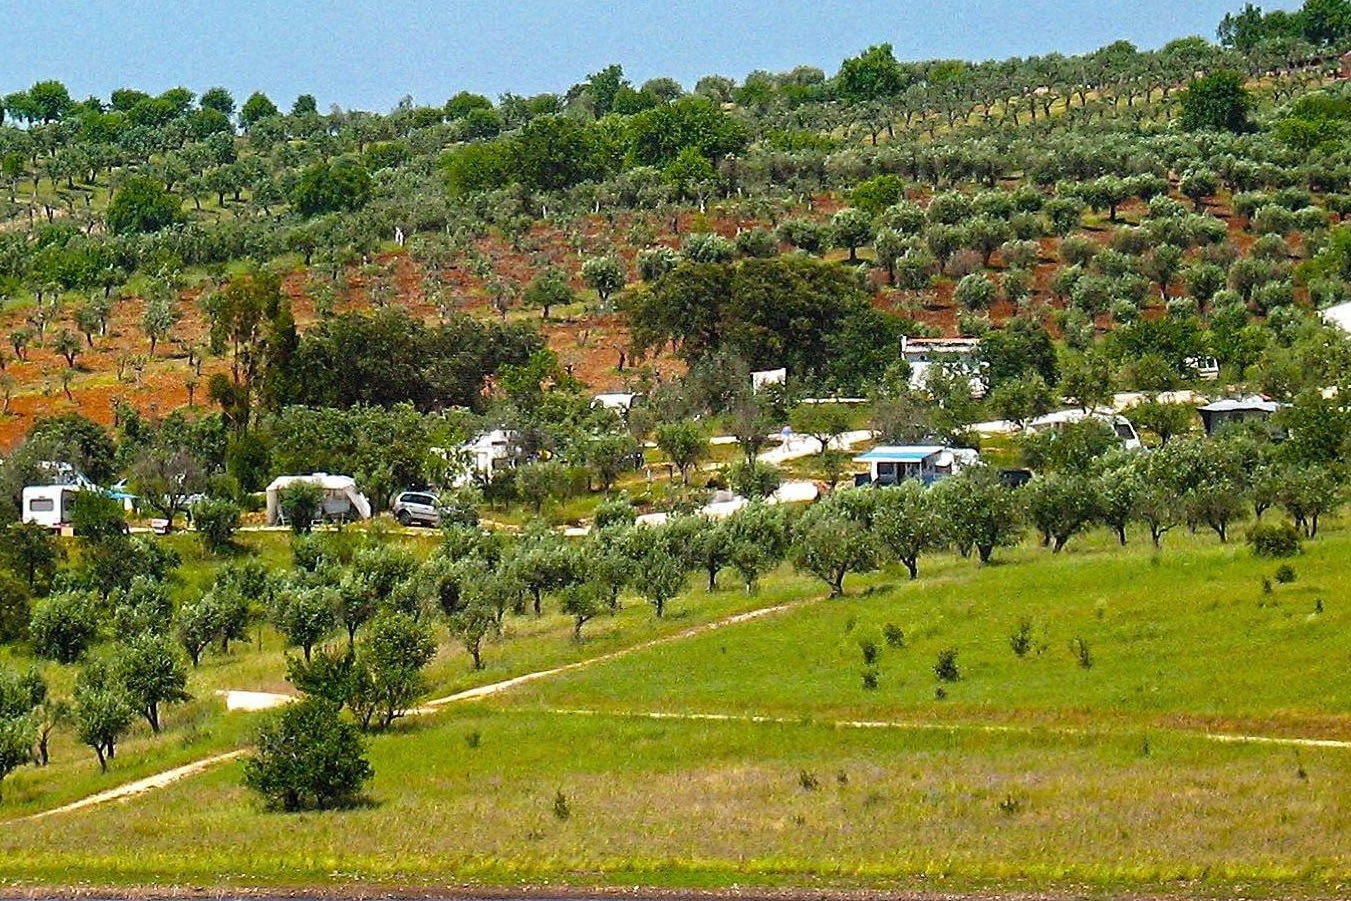 Camping Rosário (adults only)